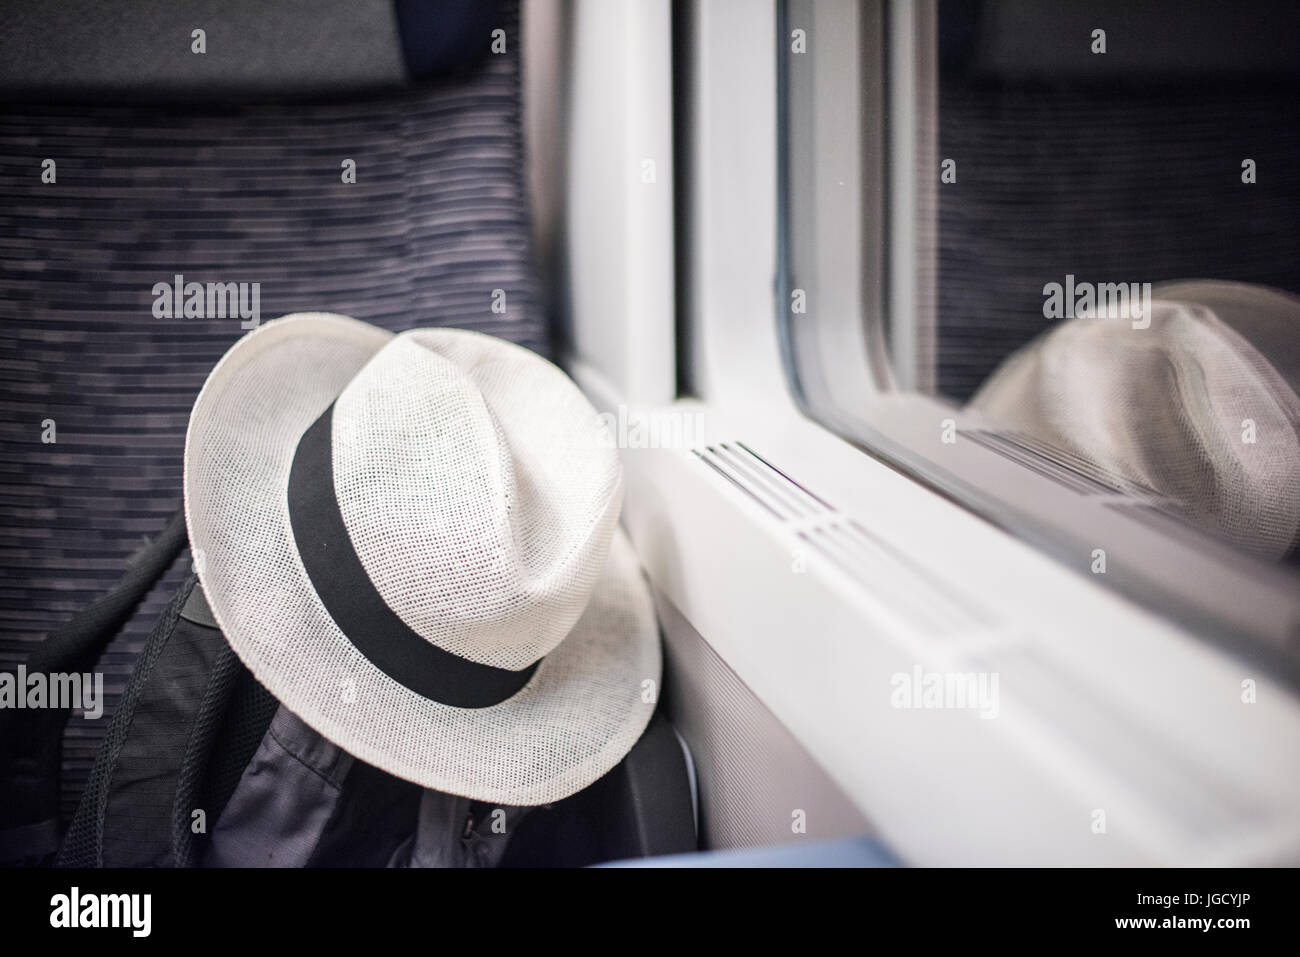 Hat and bag on a train Stock Photo